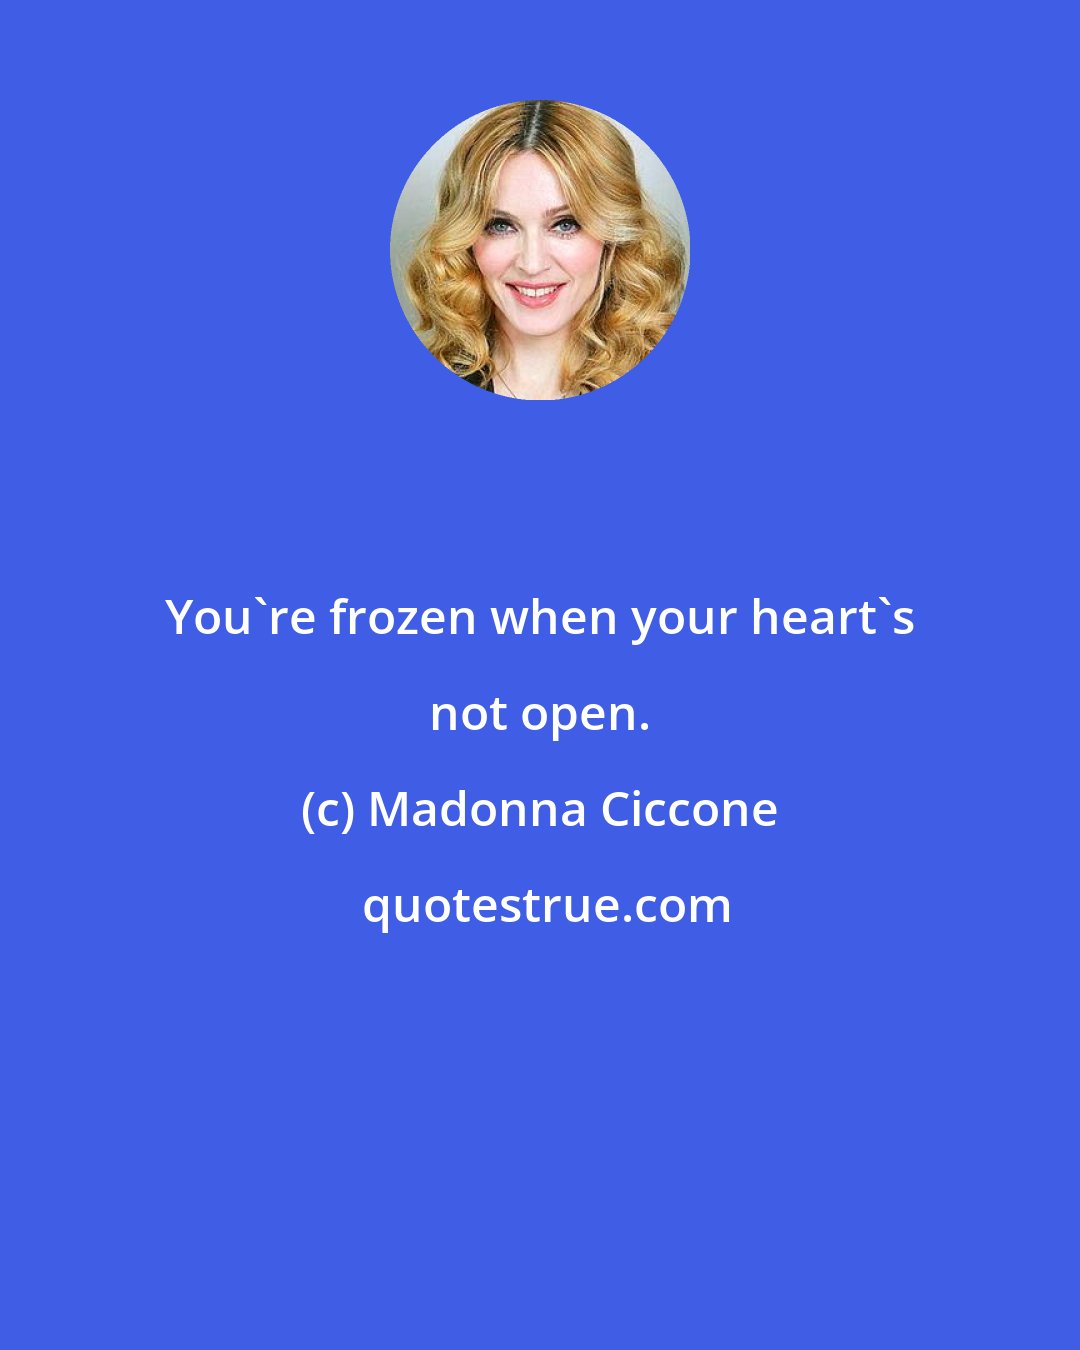 Madonna Ciccone: You're frozen when your heart's not open.